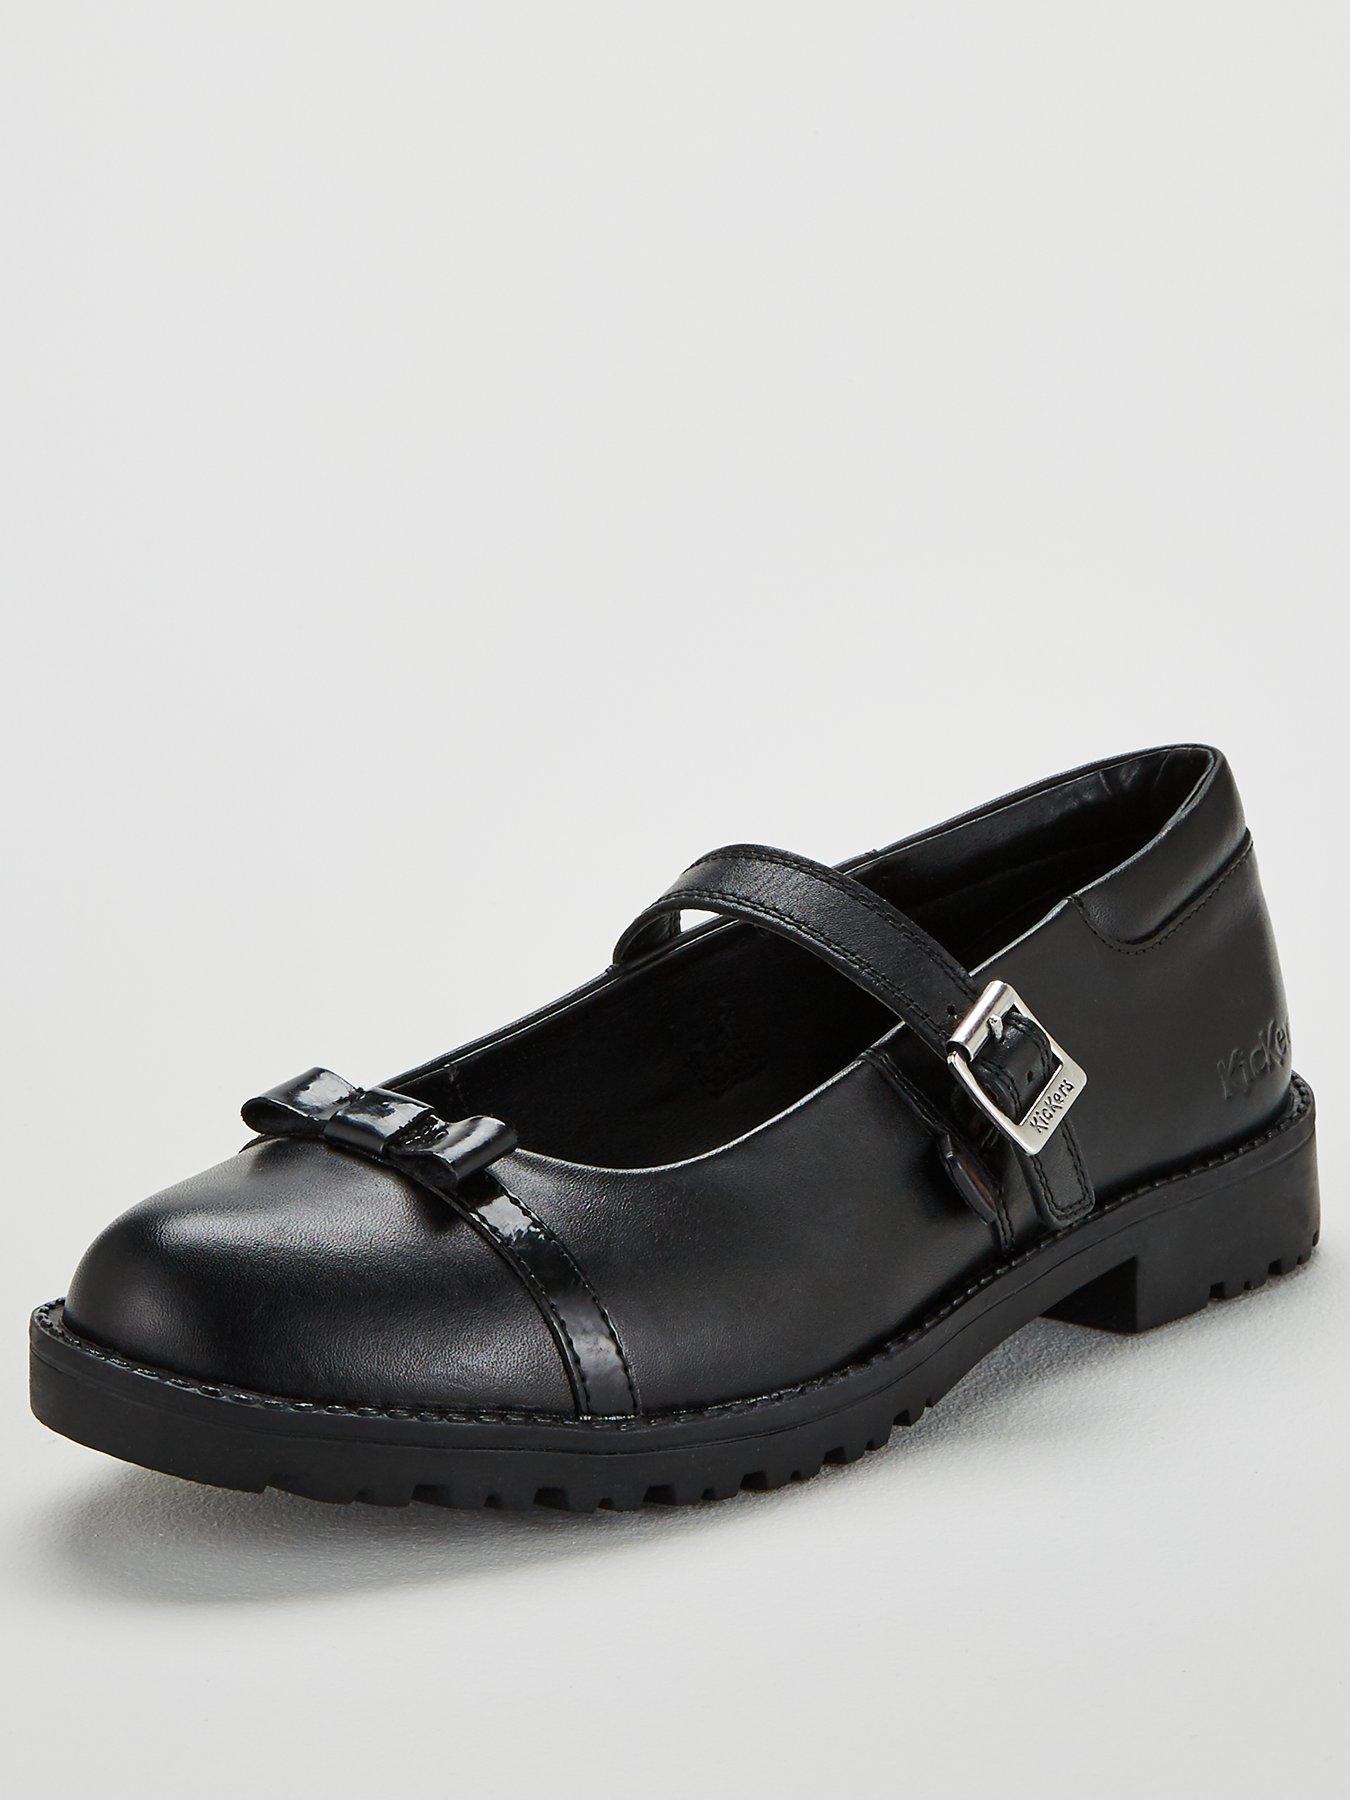 Kickers Lachly Bow Flat Shoes - Black 